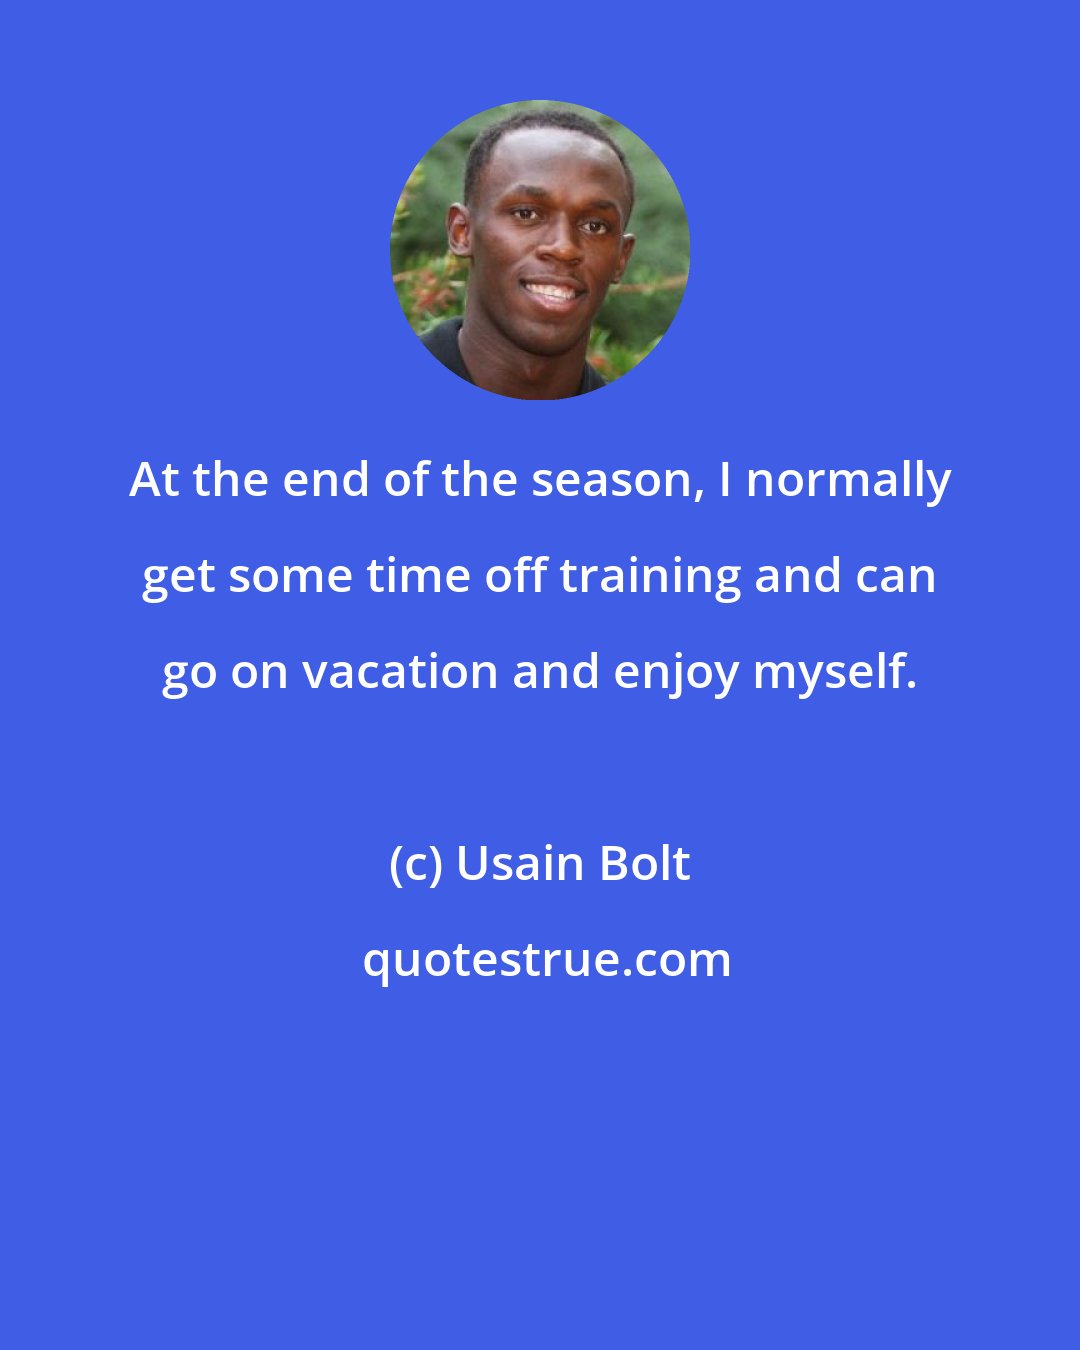 Usain Bolt: At the end of the season, I normally get some time off training and can go on vacation and enjoy myself.